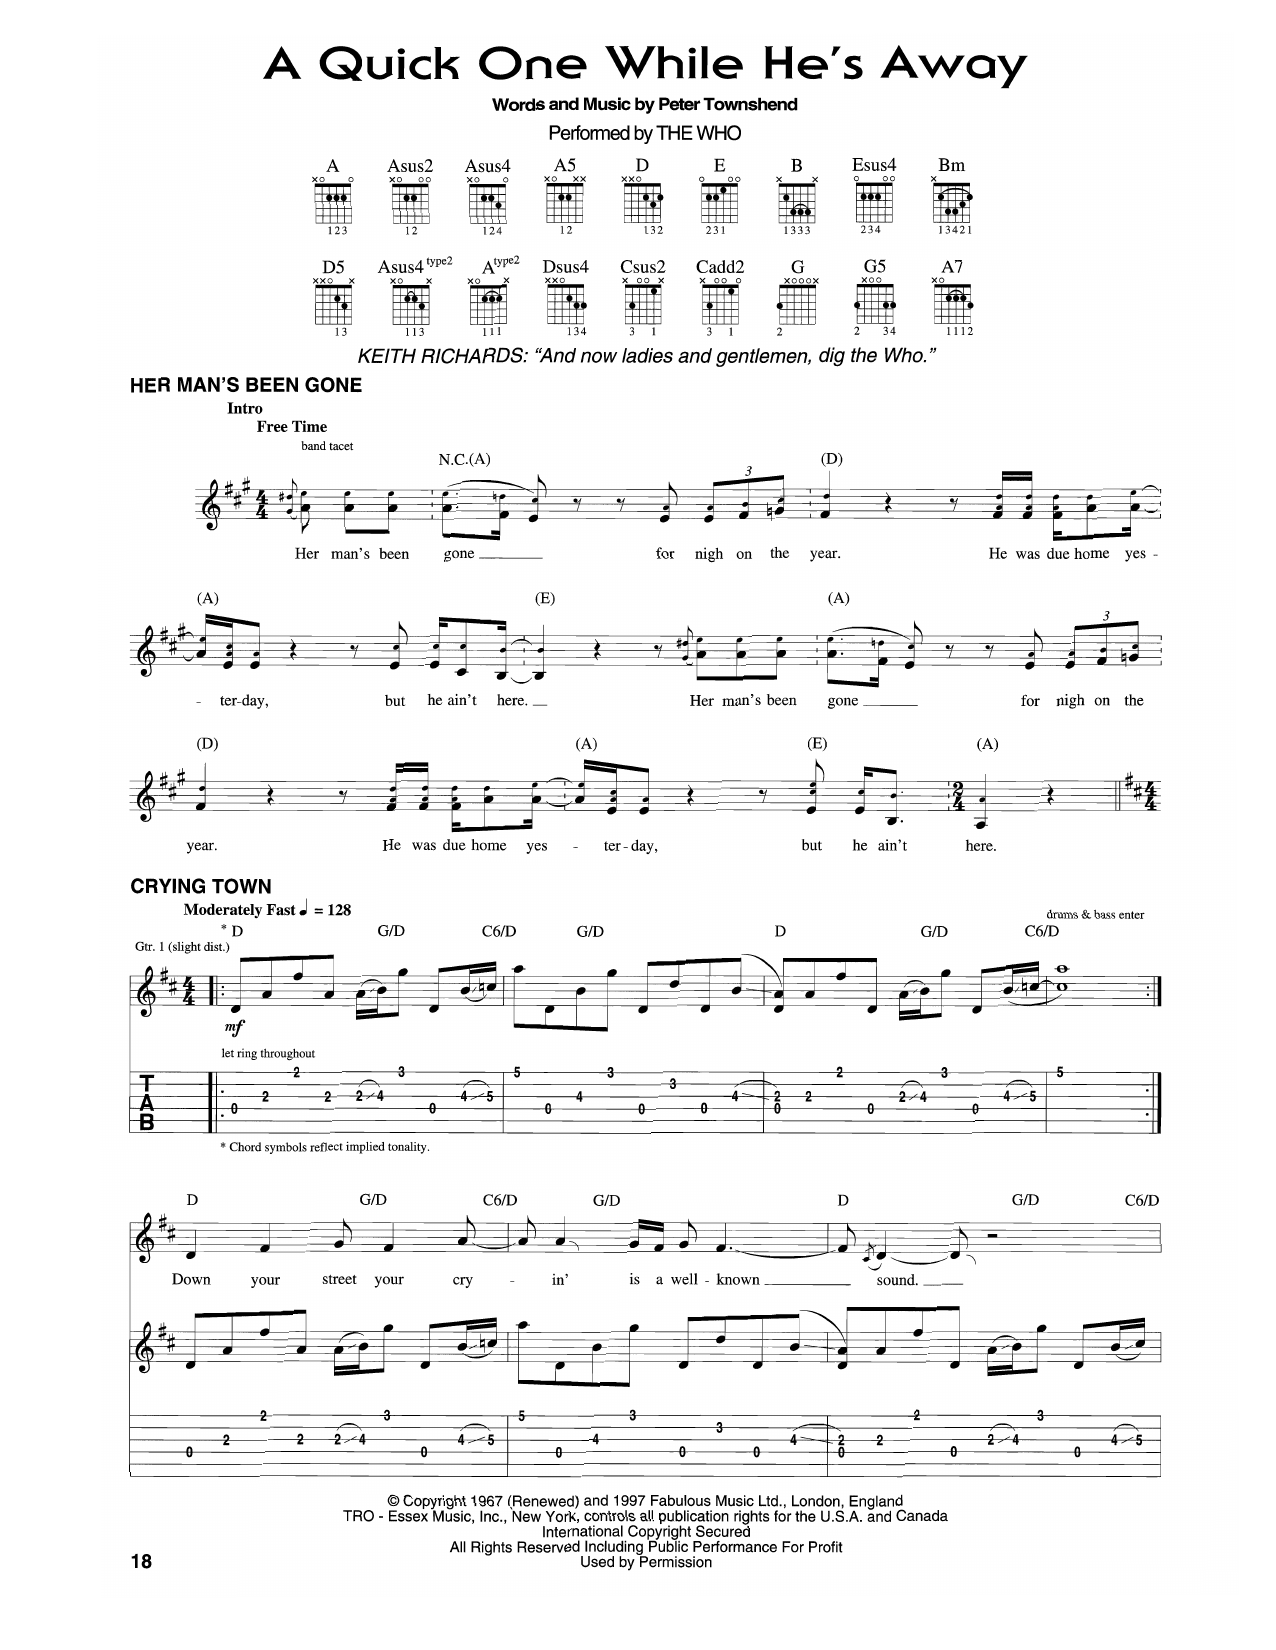 Download The Who A Quick One While He's Away Sheet Music